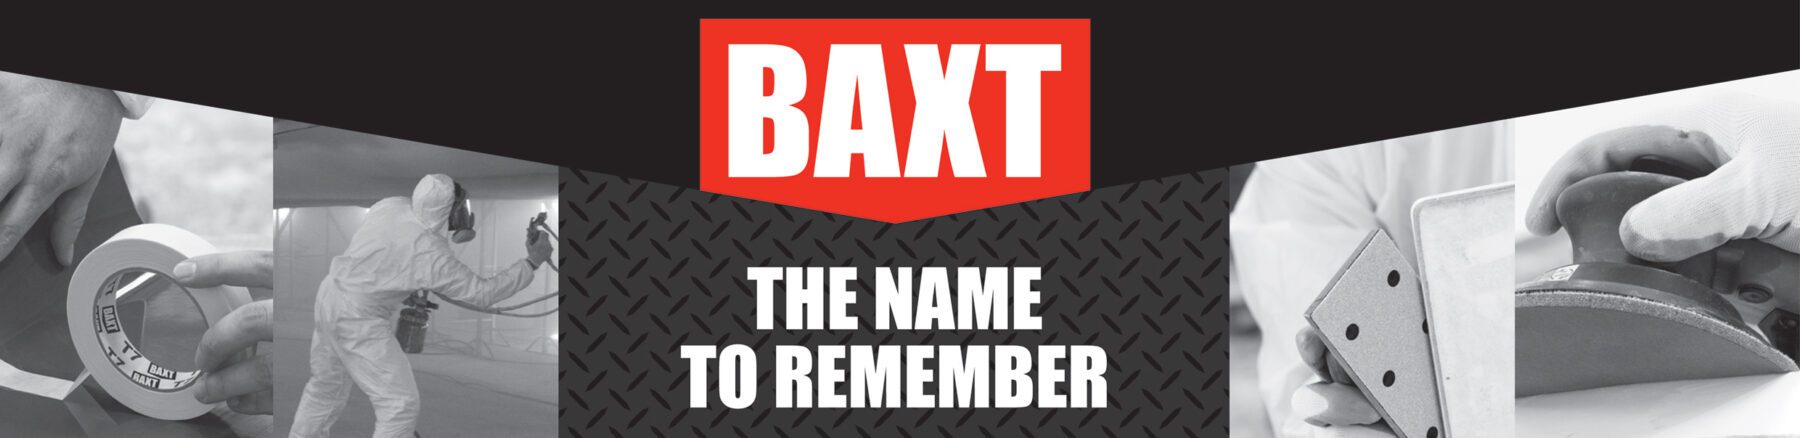 BAXT The name to remember banner